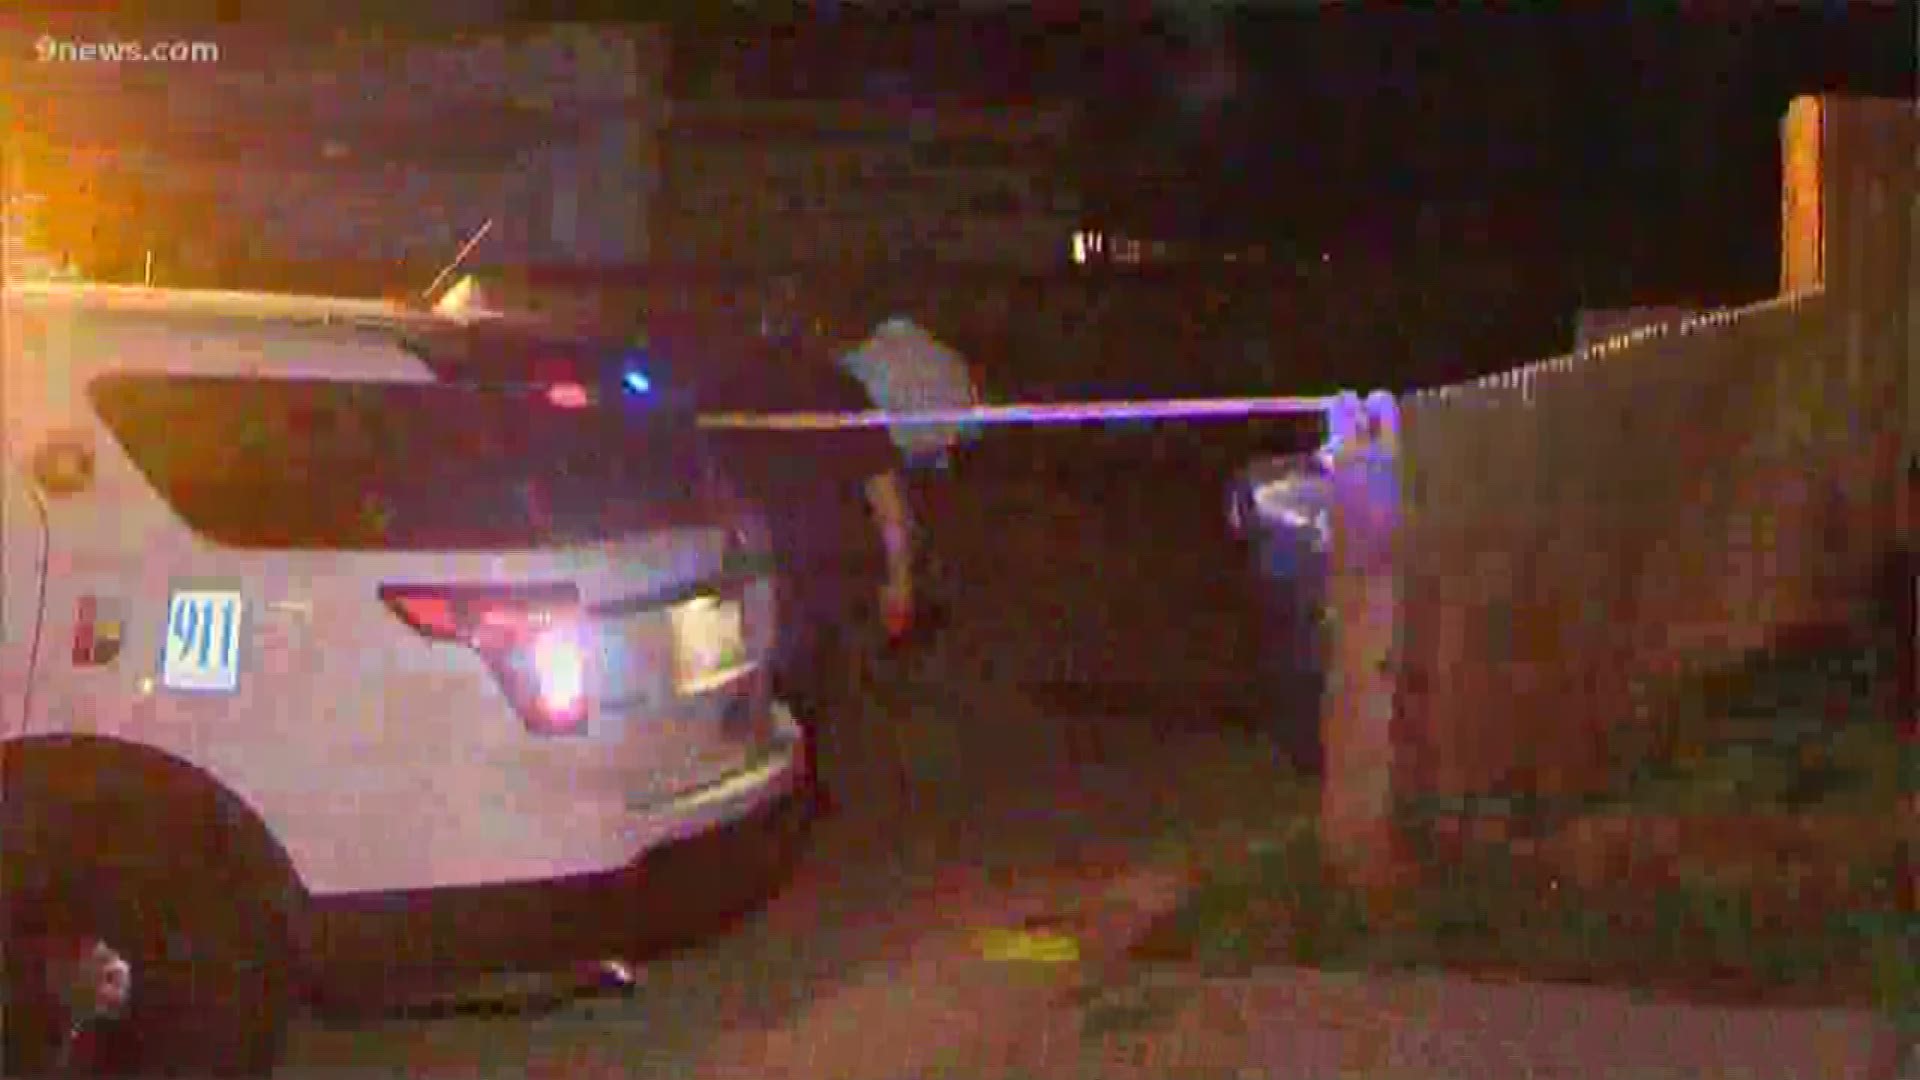 There were 2 shooting overnight in Denver. One person was killed in the shooting near 36th and Cook.